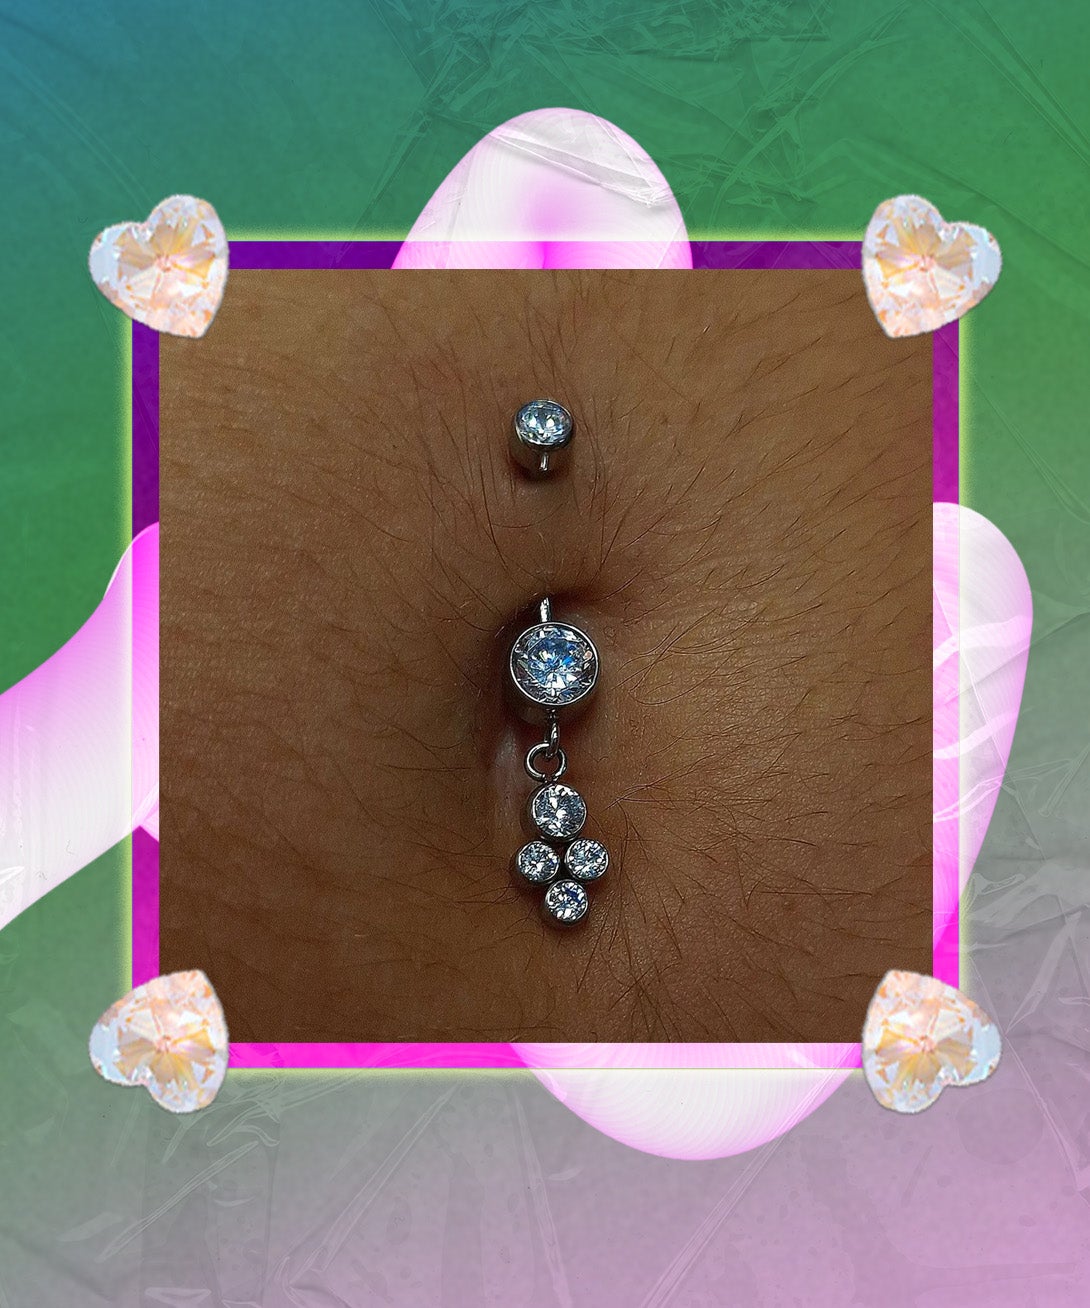 Heyy I am looking for a Louis Vuitton navel piercing for my best